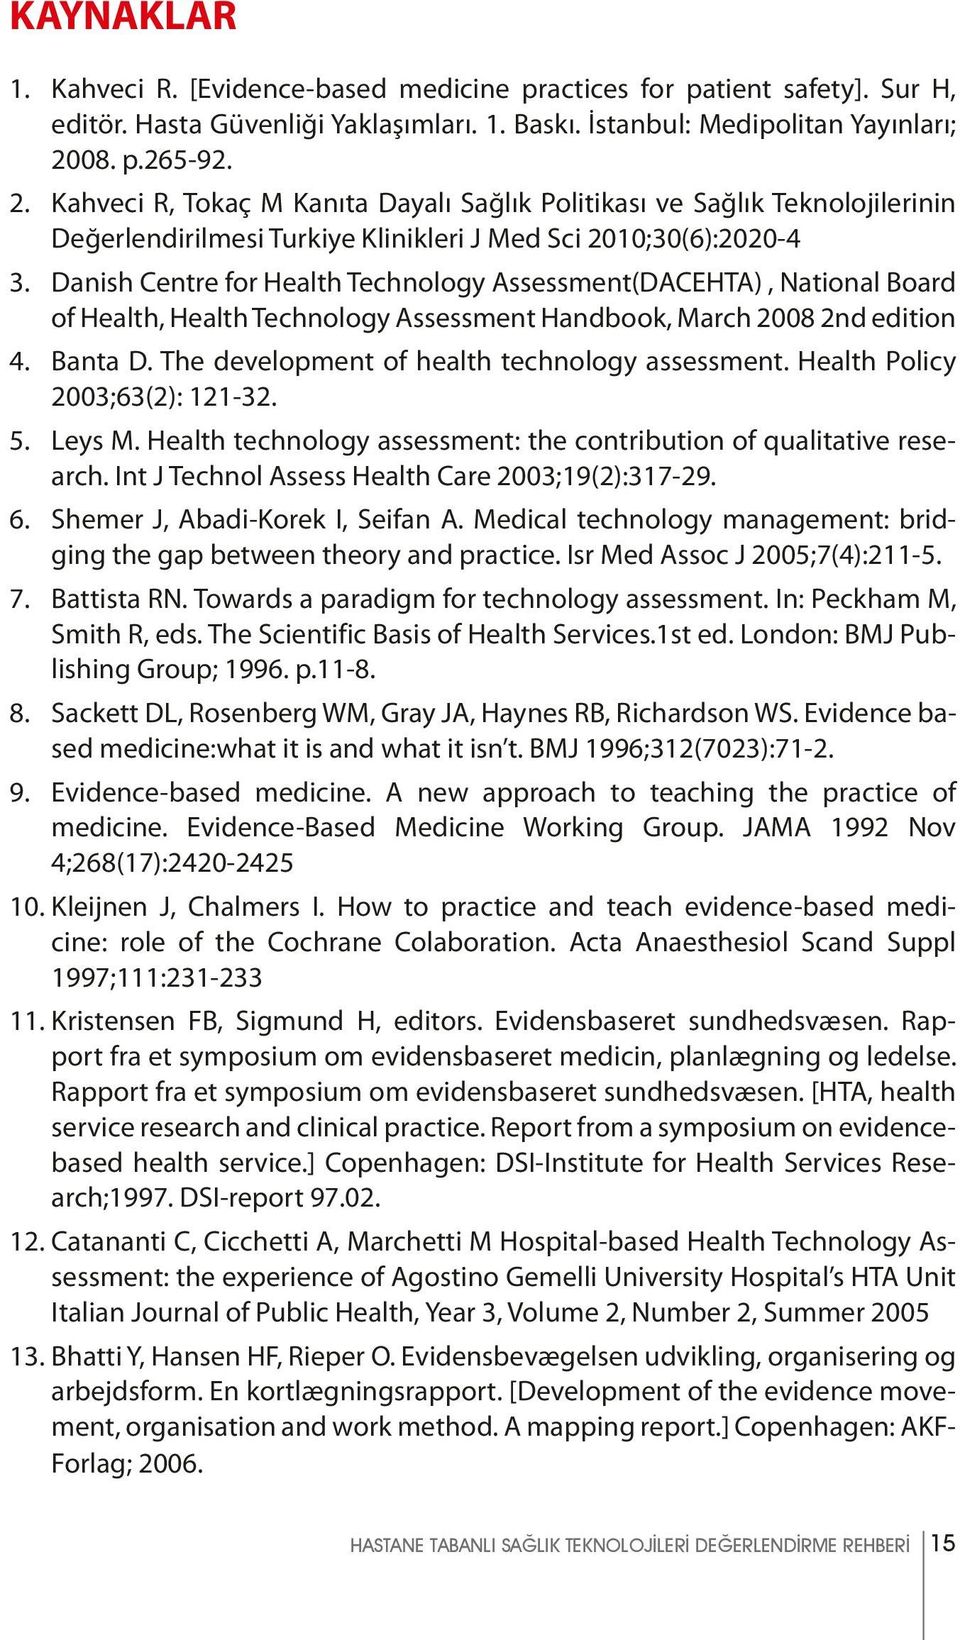 Danish Centre for Health Technology Assessment(DACEHTA), National Board of Health, Health Technology Assessment Handbook, March 2008 2nd edition 4. Banta D.